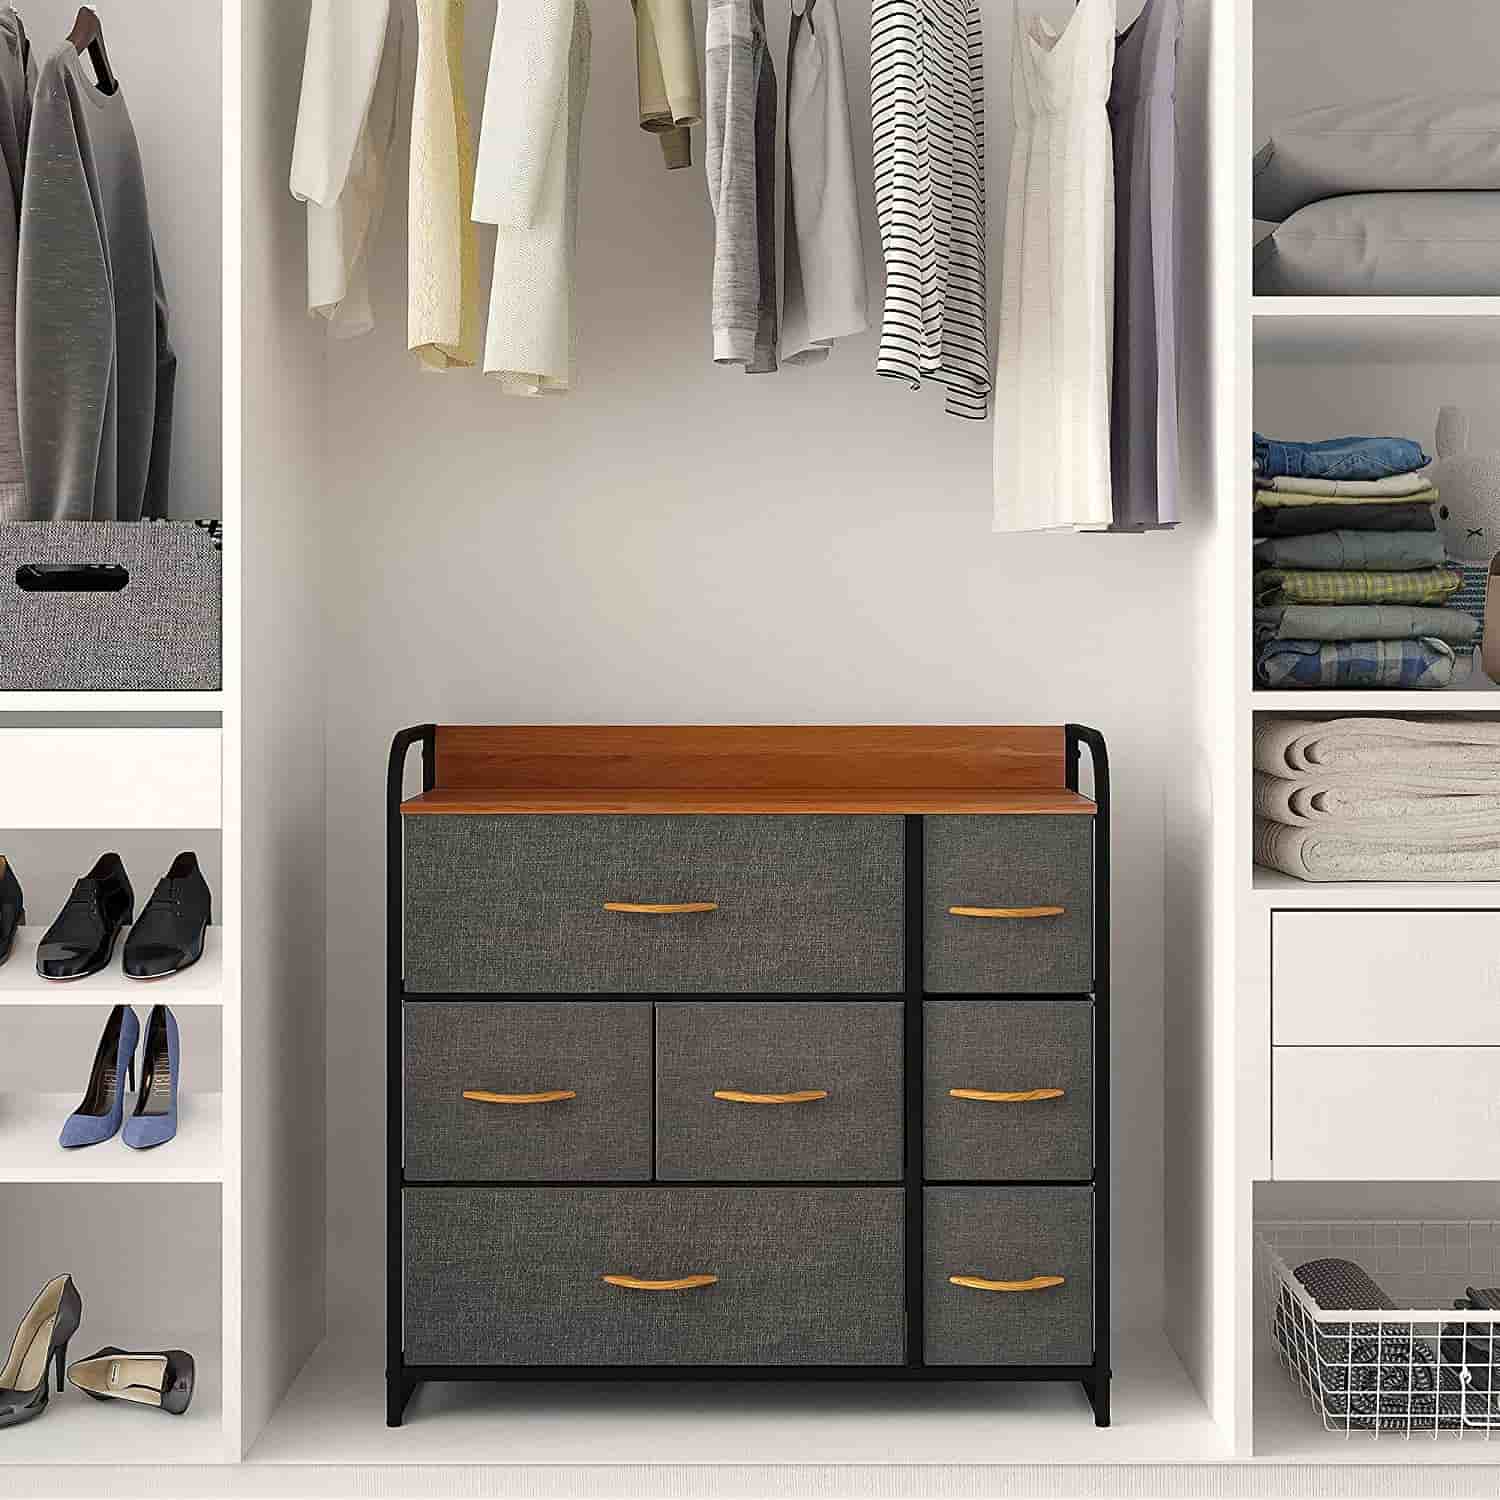 Modern YITAHOME Dresser with 7 Drawers – Fabric Storage Tower